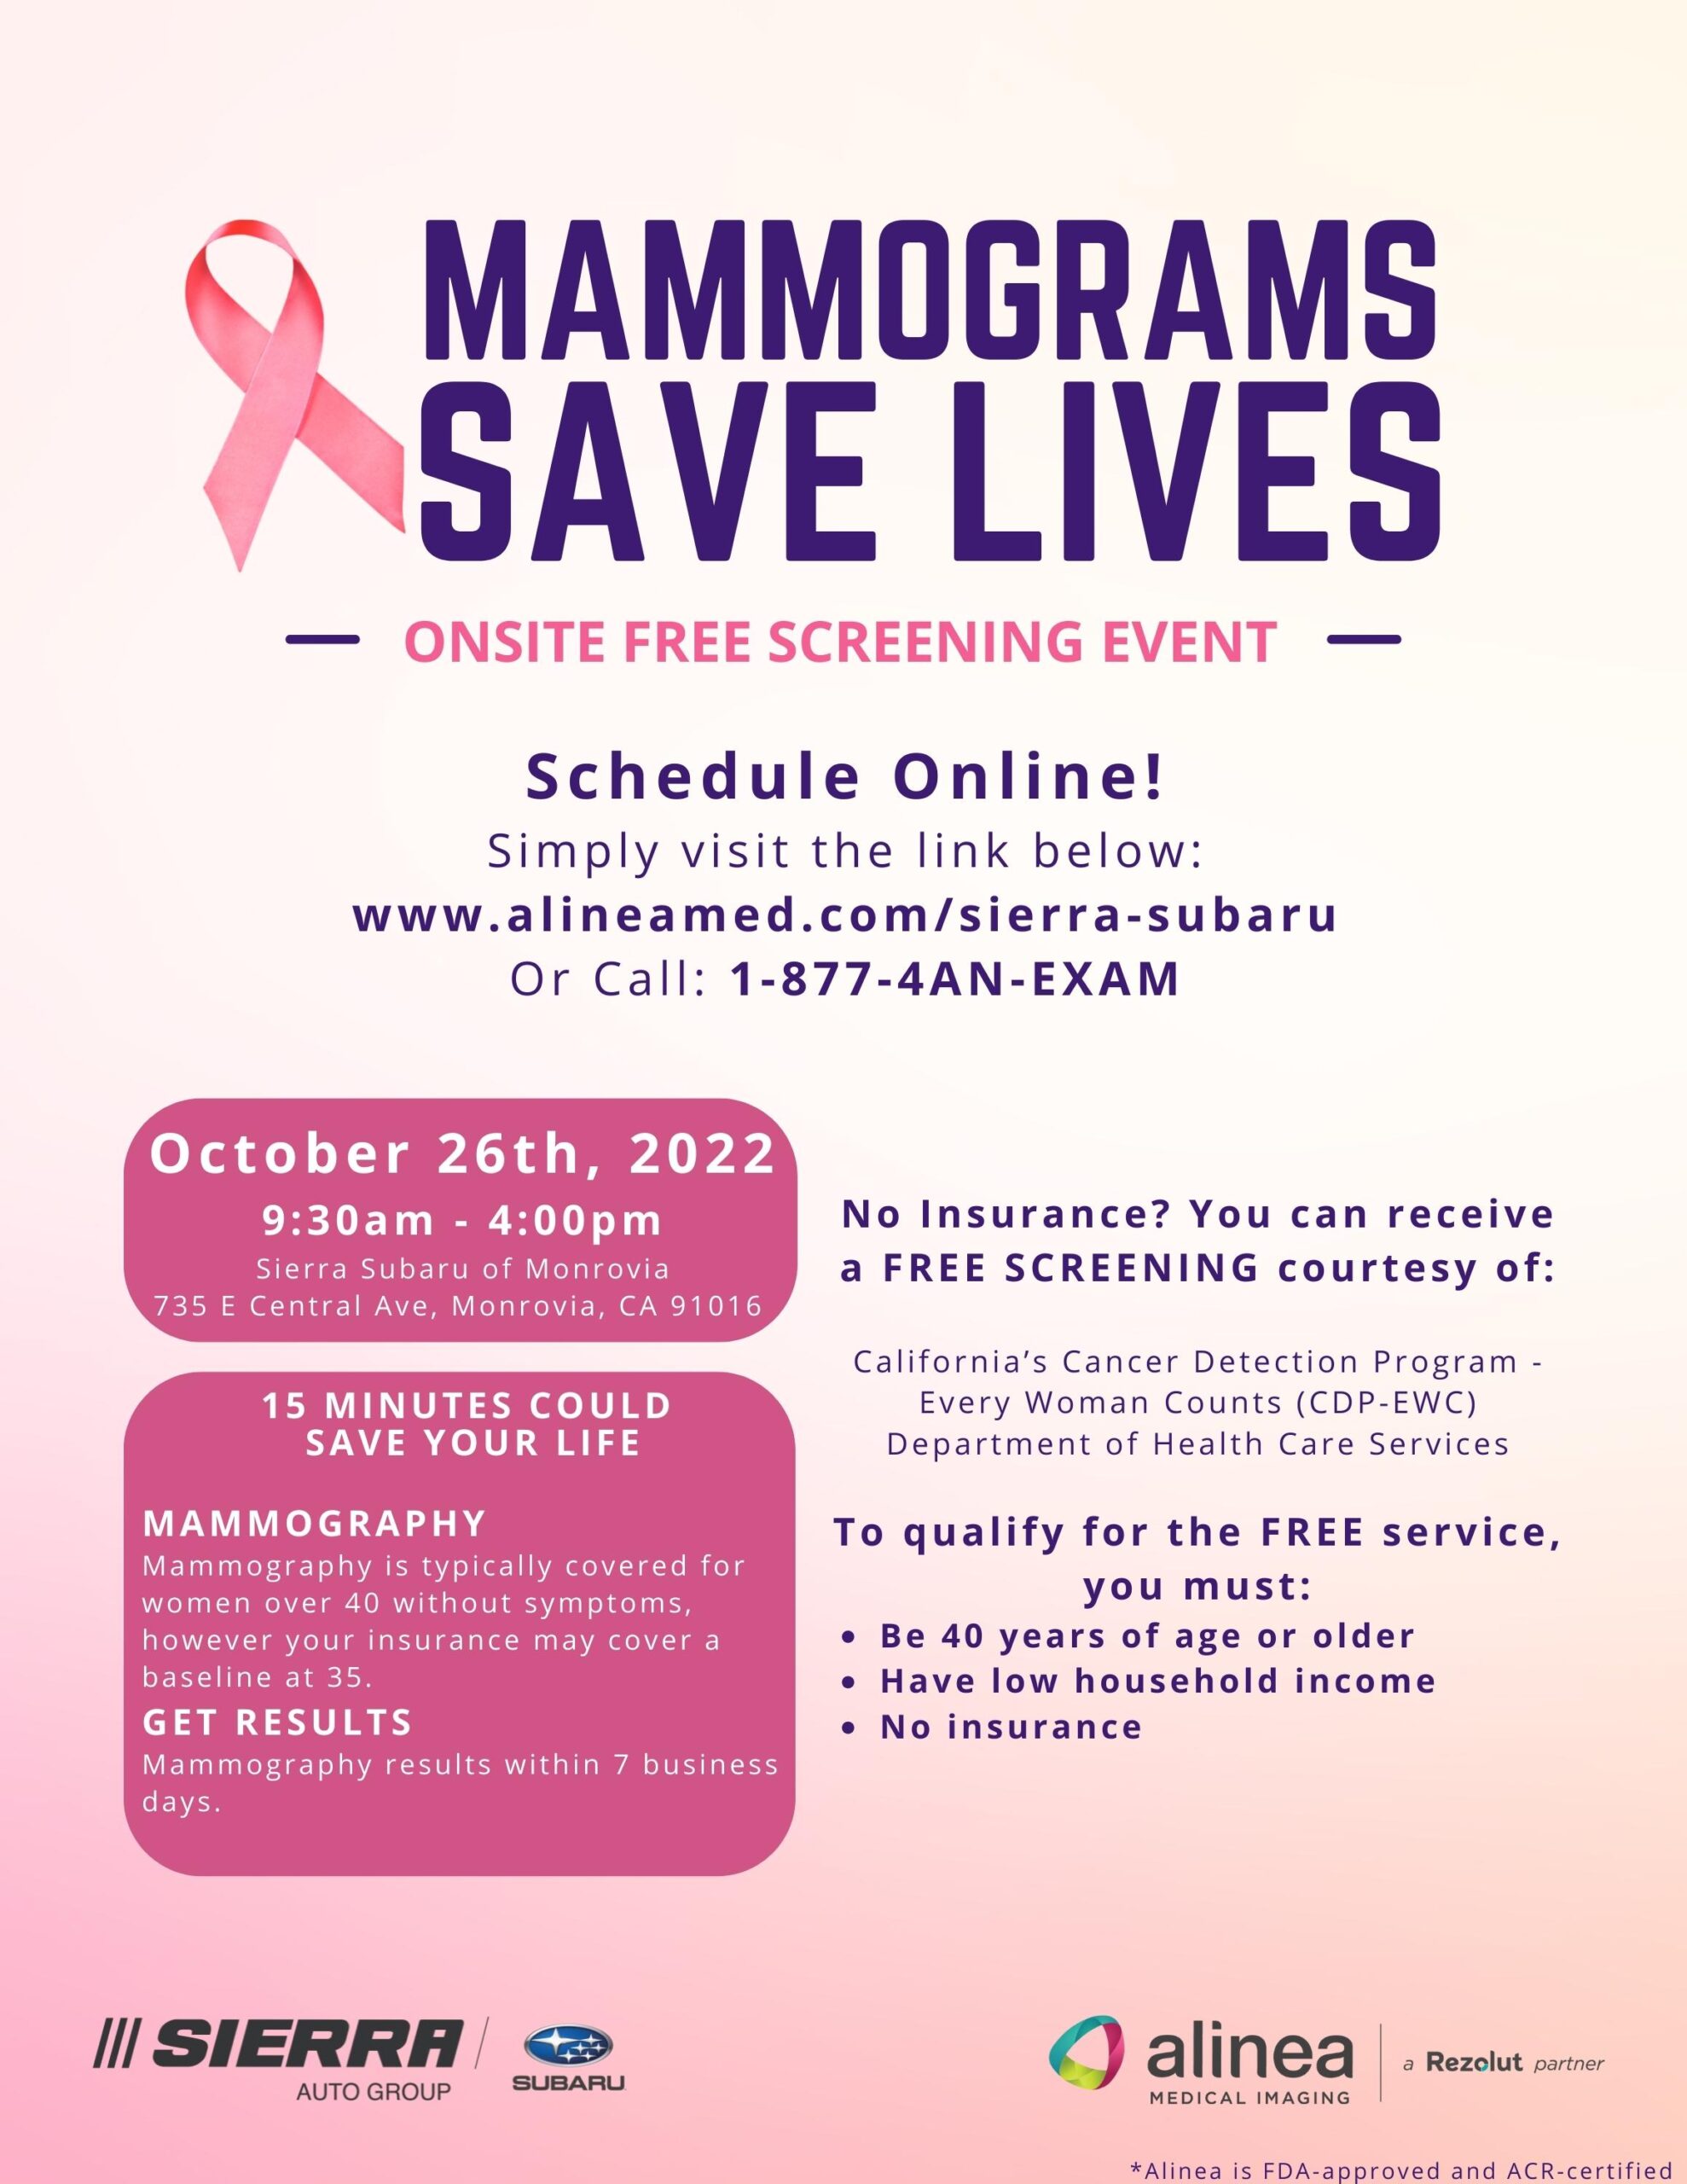 pink mammograms save lives event info from Sierra Subaru